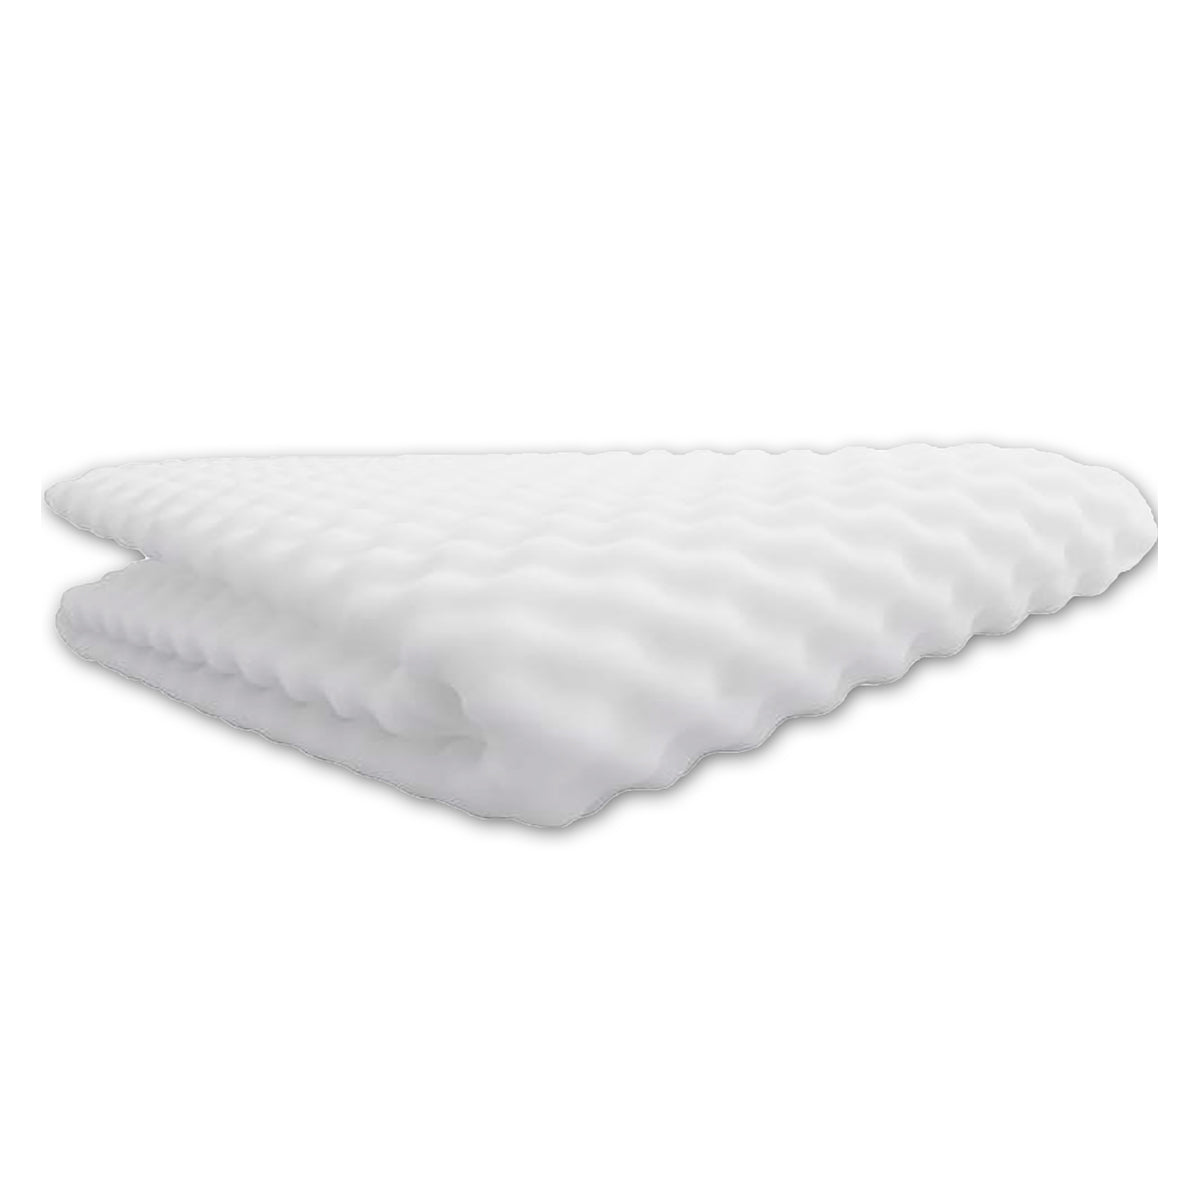 MATTRESS WITH ORTHOPEDIC DESIGN QUEEN SIZE 530 